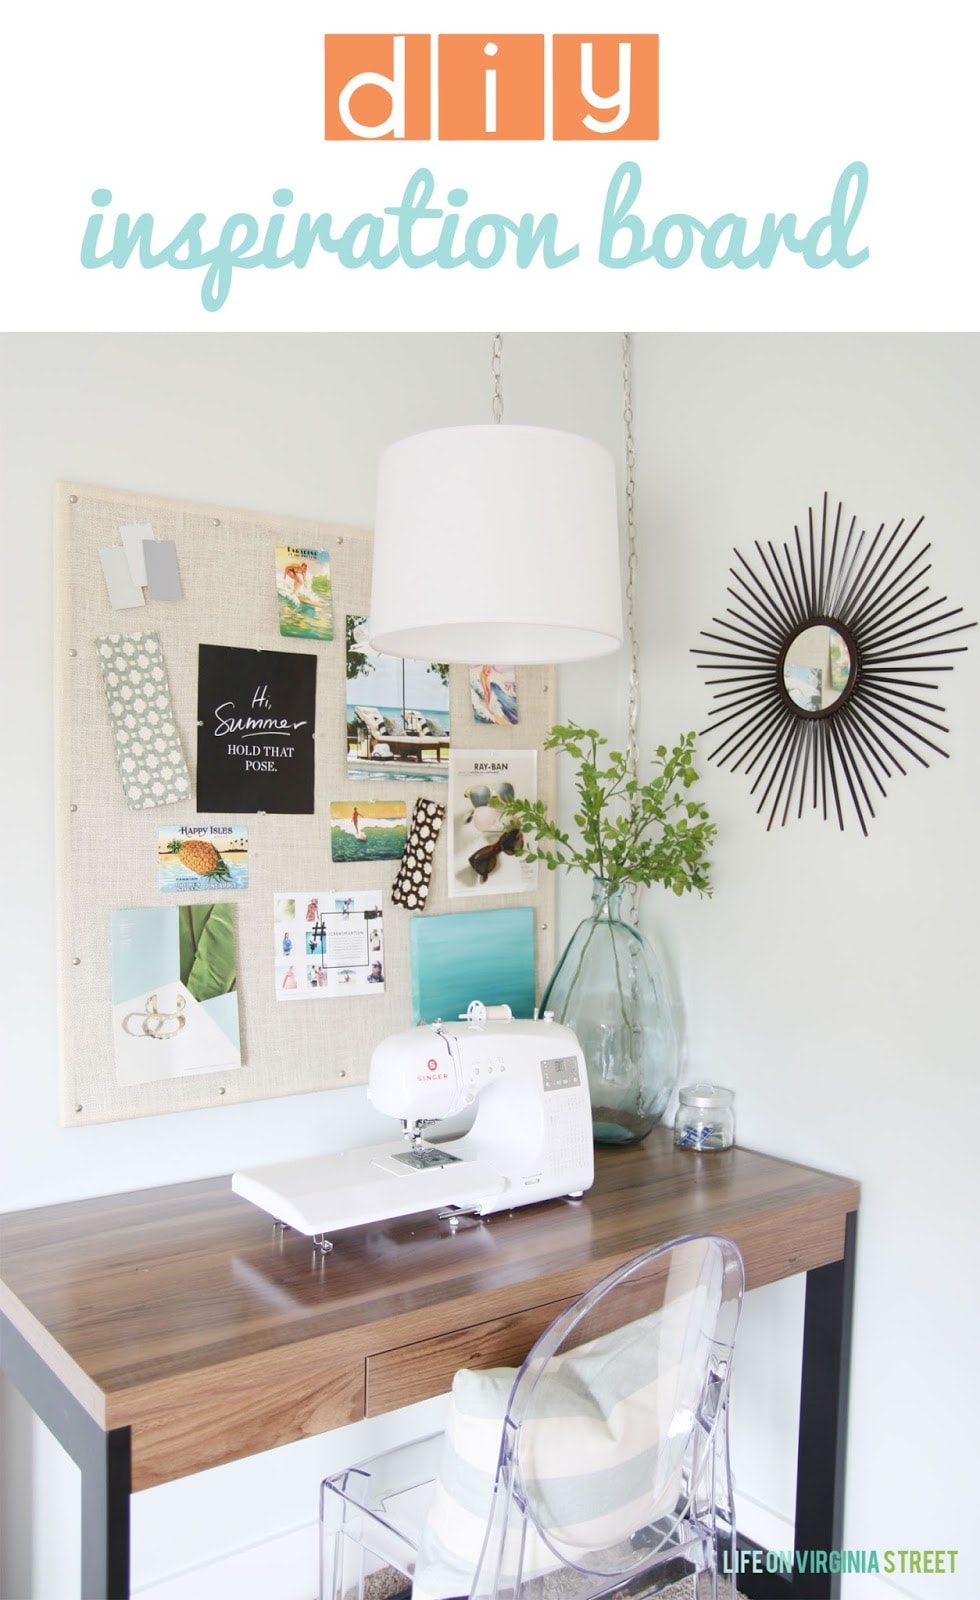 A small desk with a sewing machine on it and an inspiration board above it.